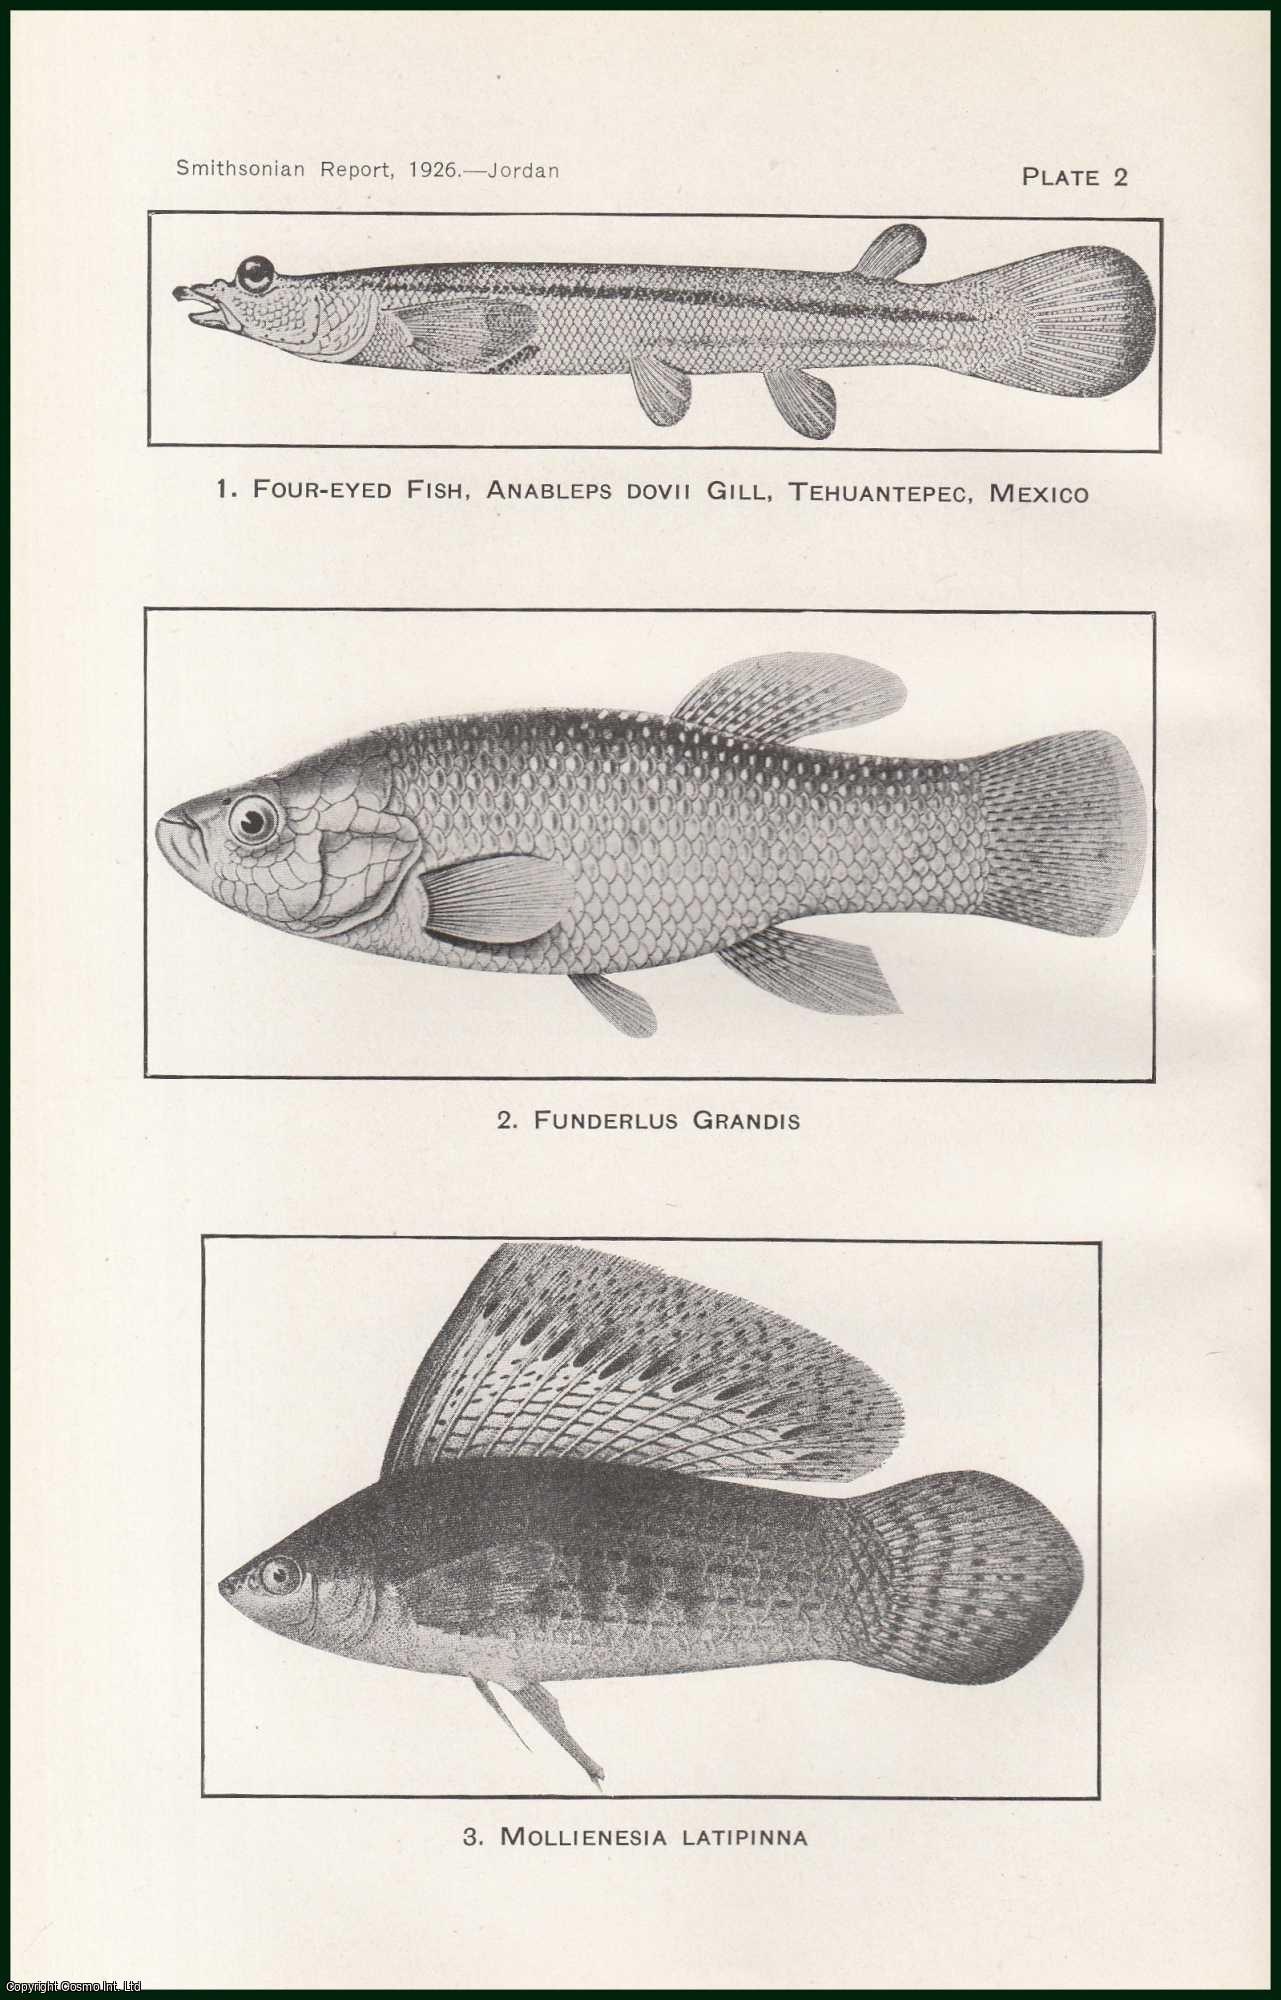 David Starr Jordan - The Mosquito Fish (Gambusia) and its Relation to Malaria. An original article from the Report of the Smithsonian Institution, 1926.